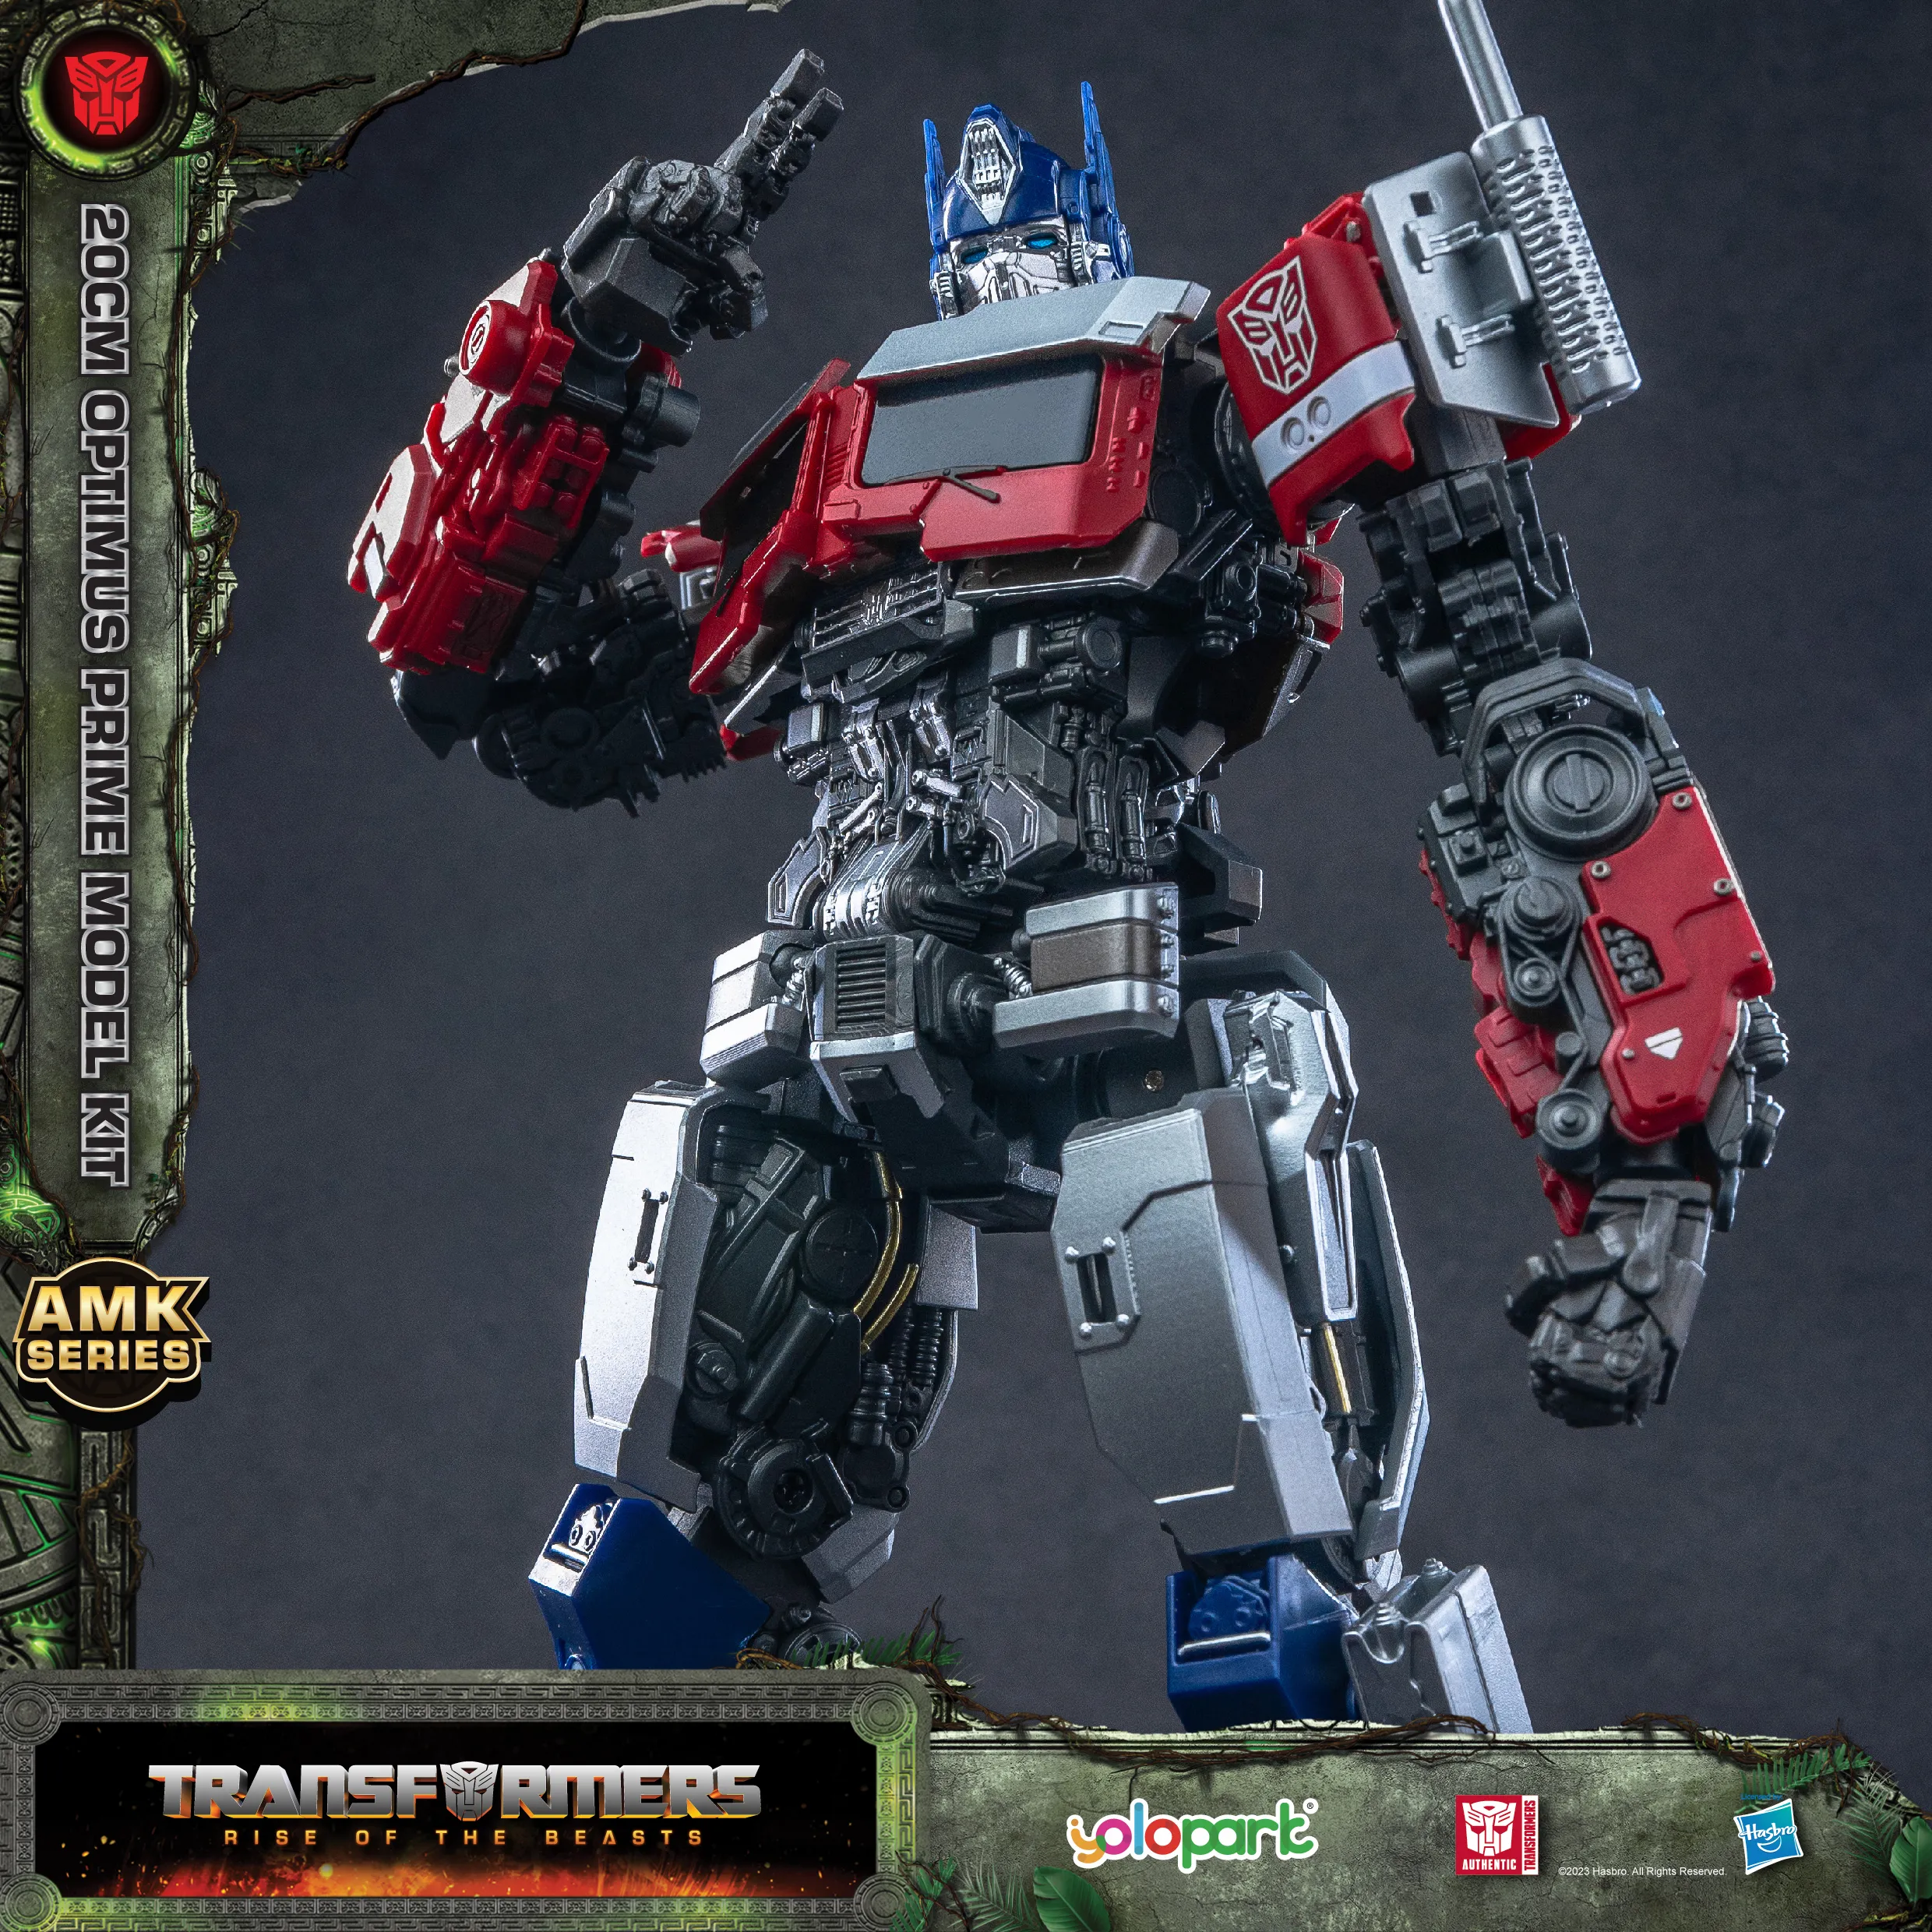 YOLOPARK Optimus Primte Transformer Toy Model Kit｜Transformers The Movie 7 Rise of the Beasts 7.87in Transformer Optimus Prime Action Figures, Collectible Transformer Toys for Transformers Lovers Fans - image 5 of 9